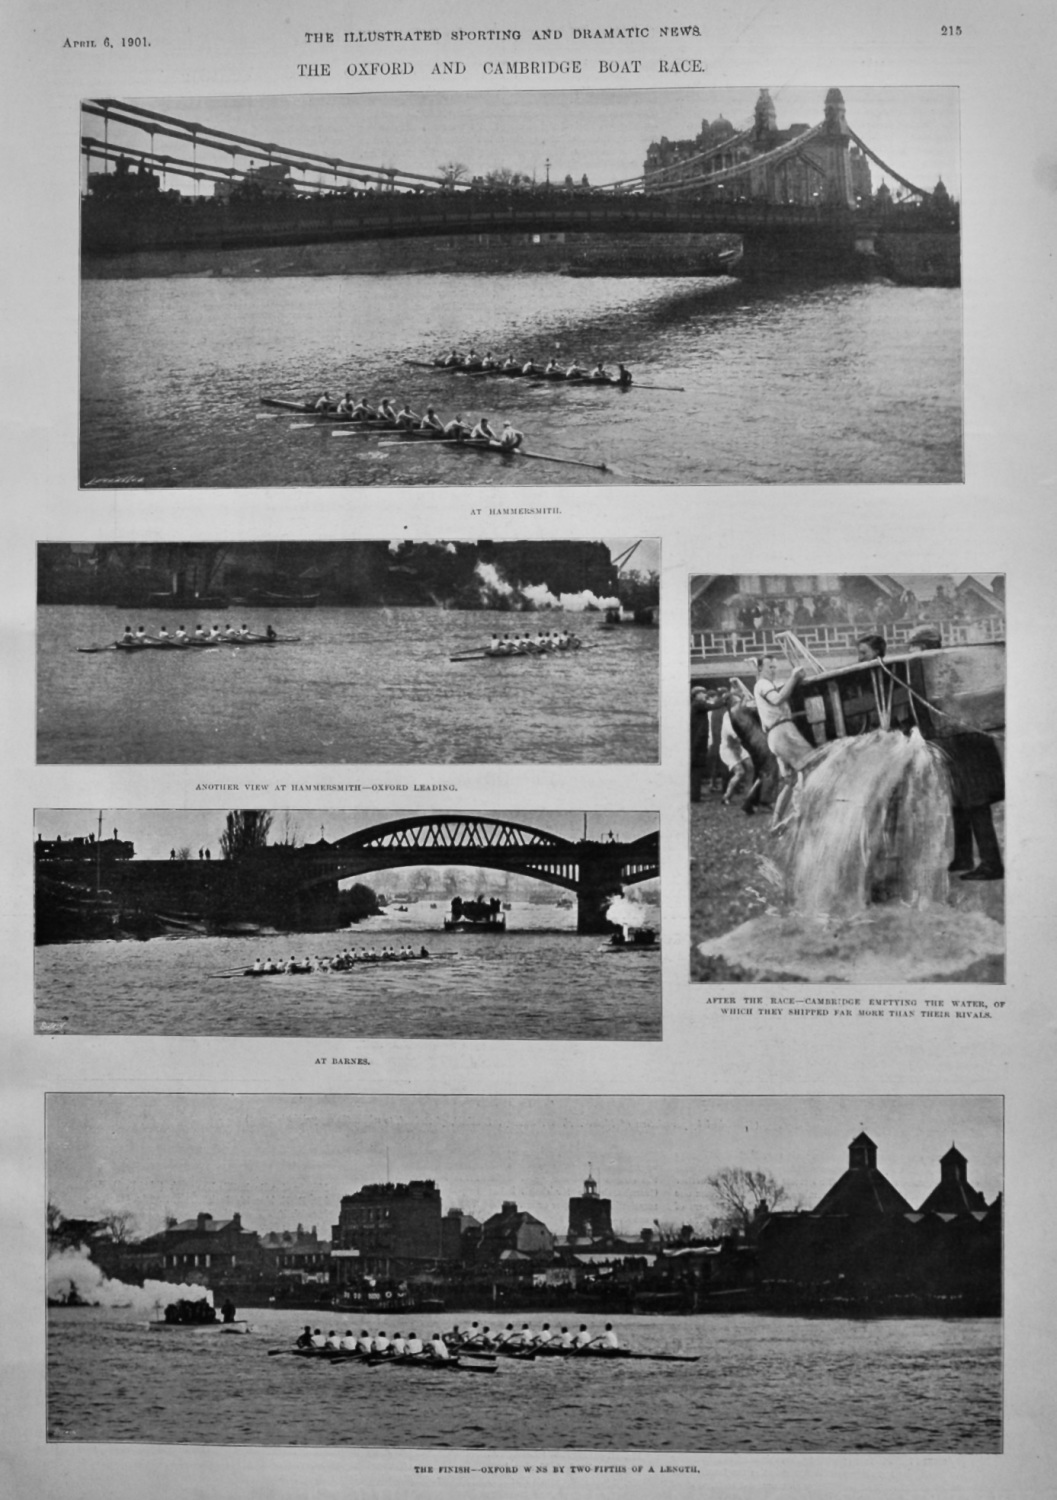 The Oxford and Cambridge Boat Race.  1901.